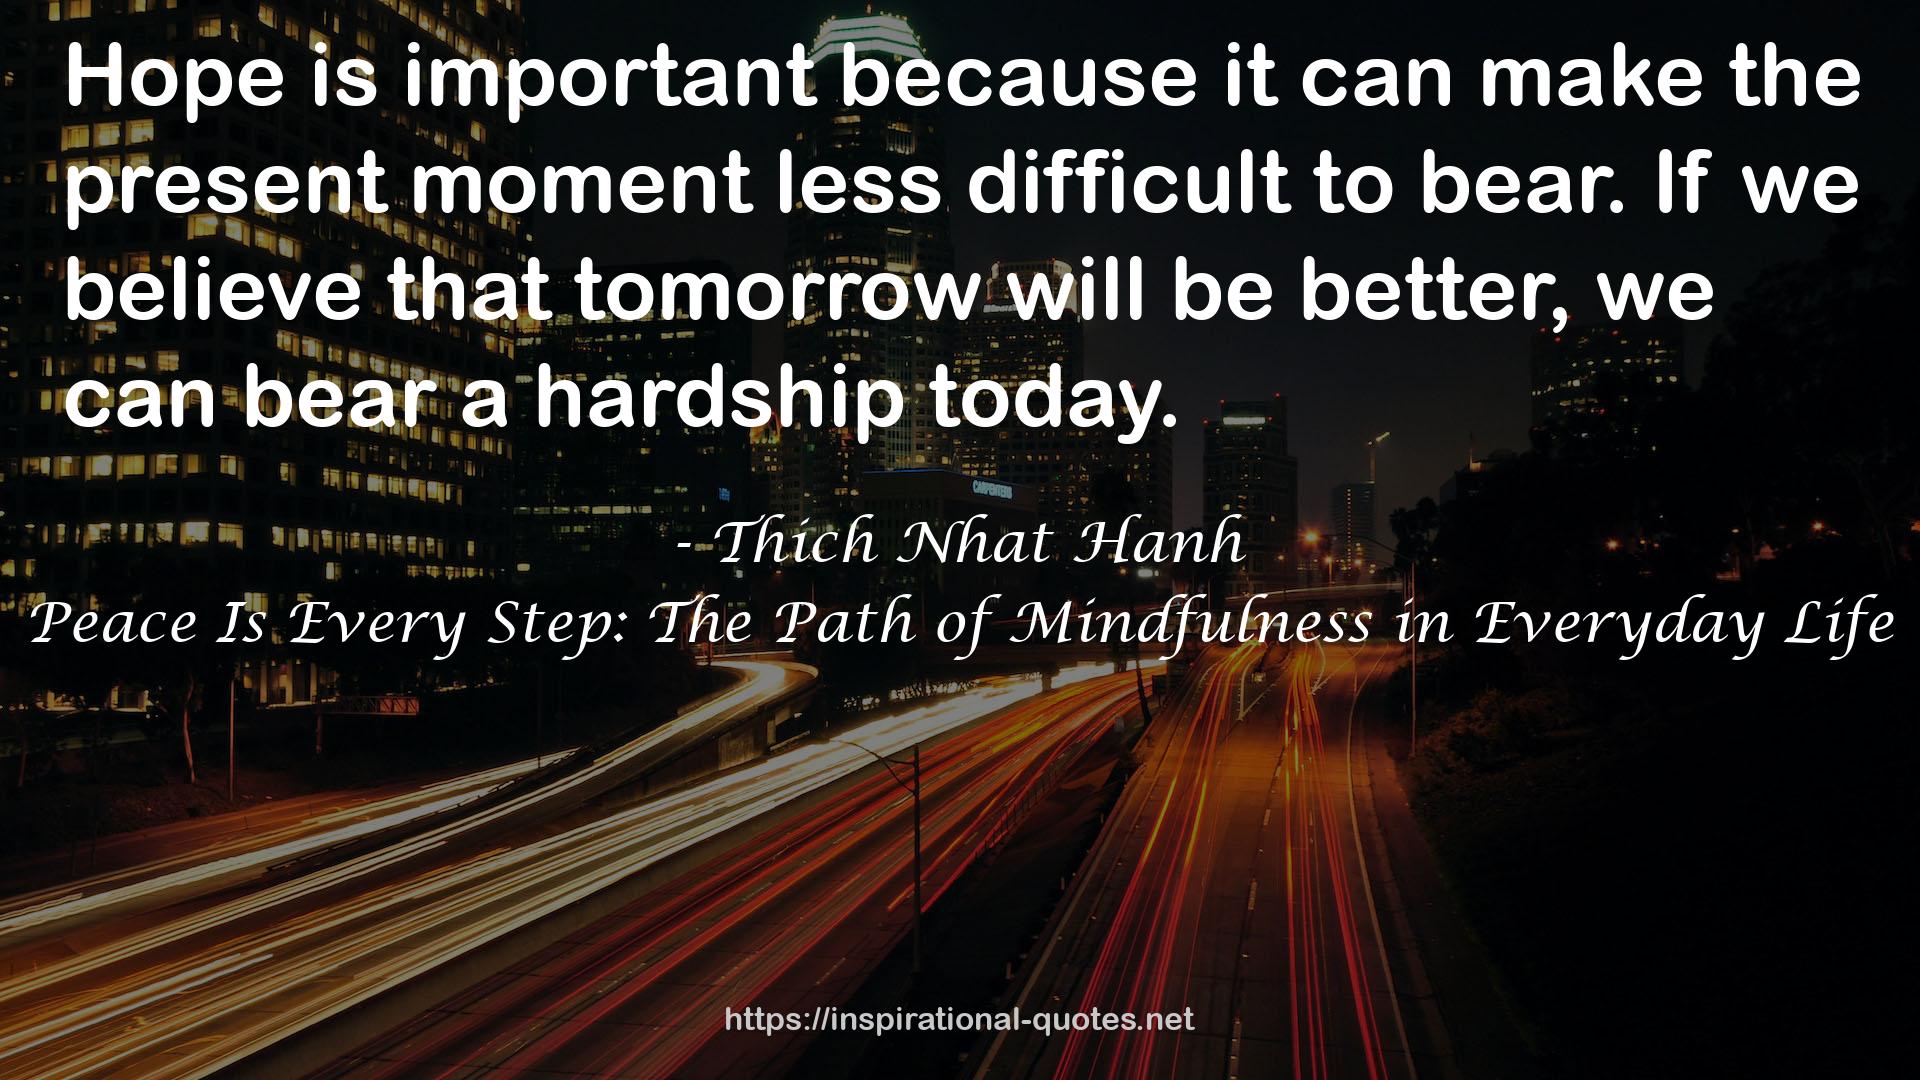 Peace Is Every Step: The Path of Mindfulness in Everyday Life QUOTES